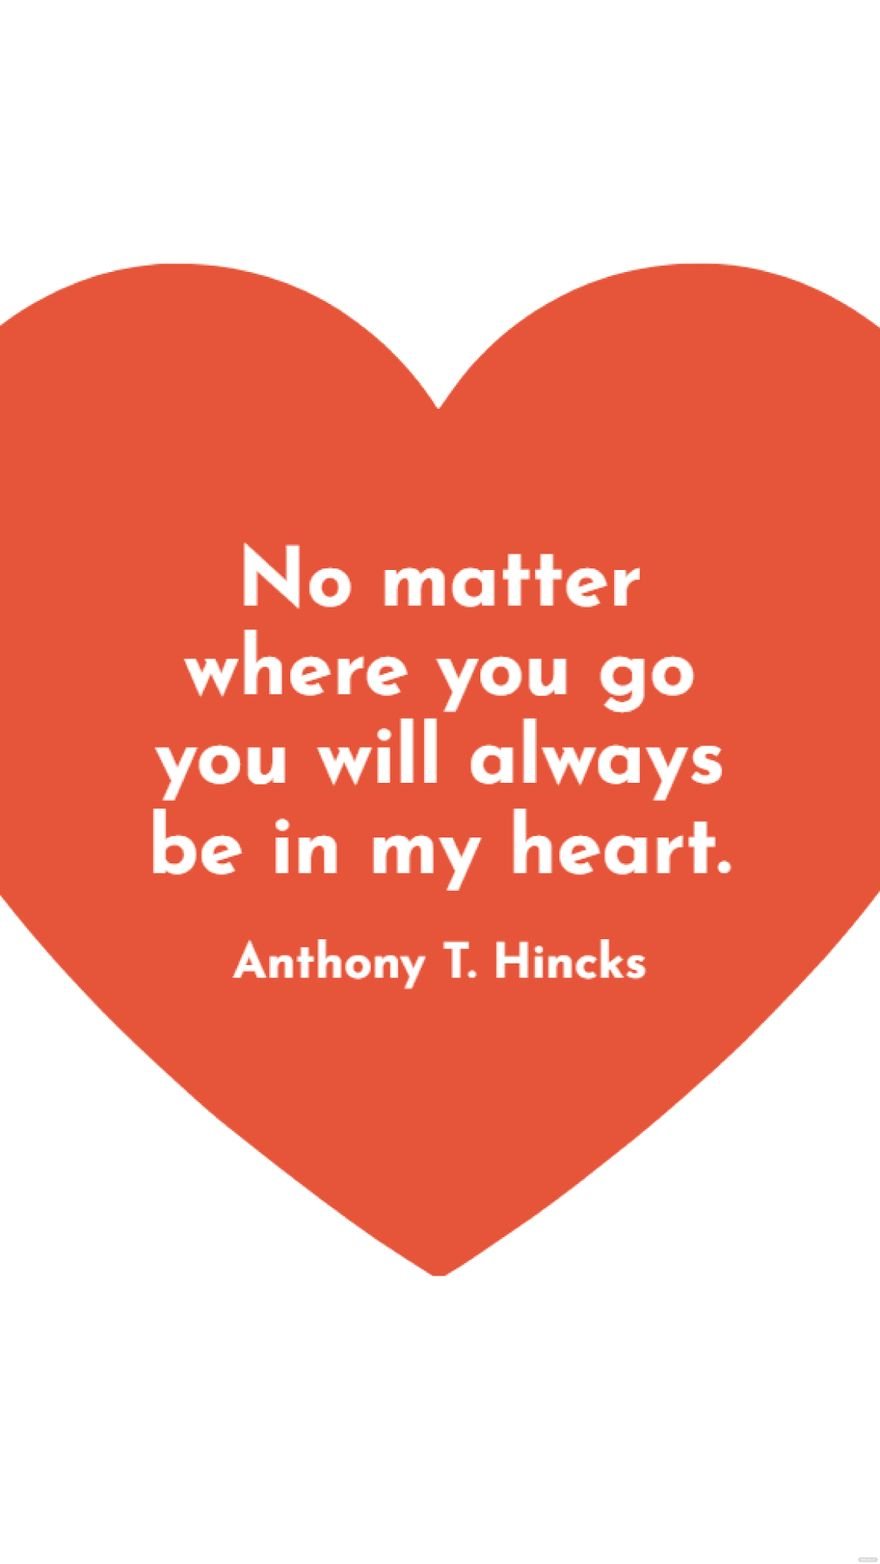 Anthony T. Hincks - No matter where you go you will always be in my heart.